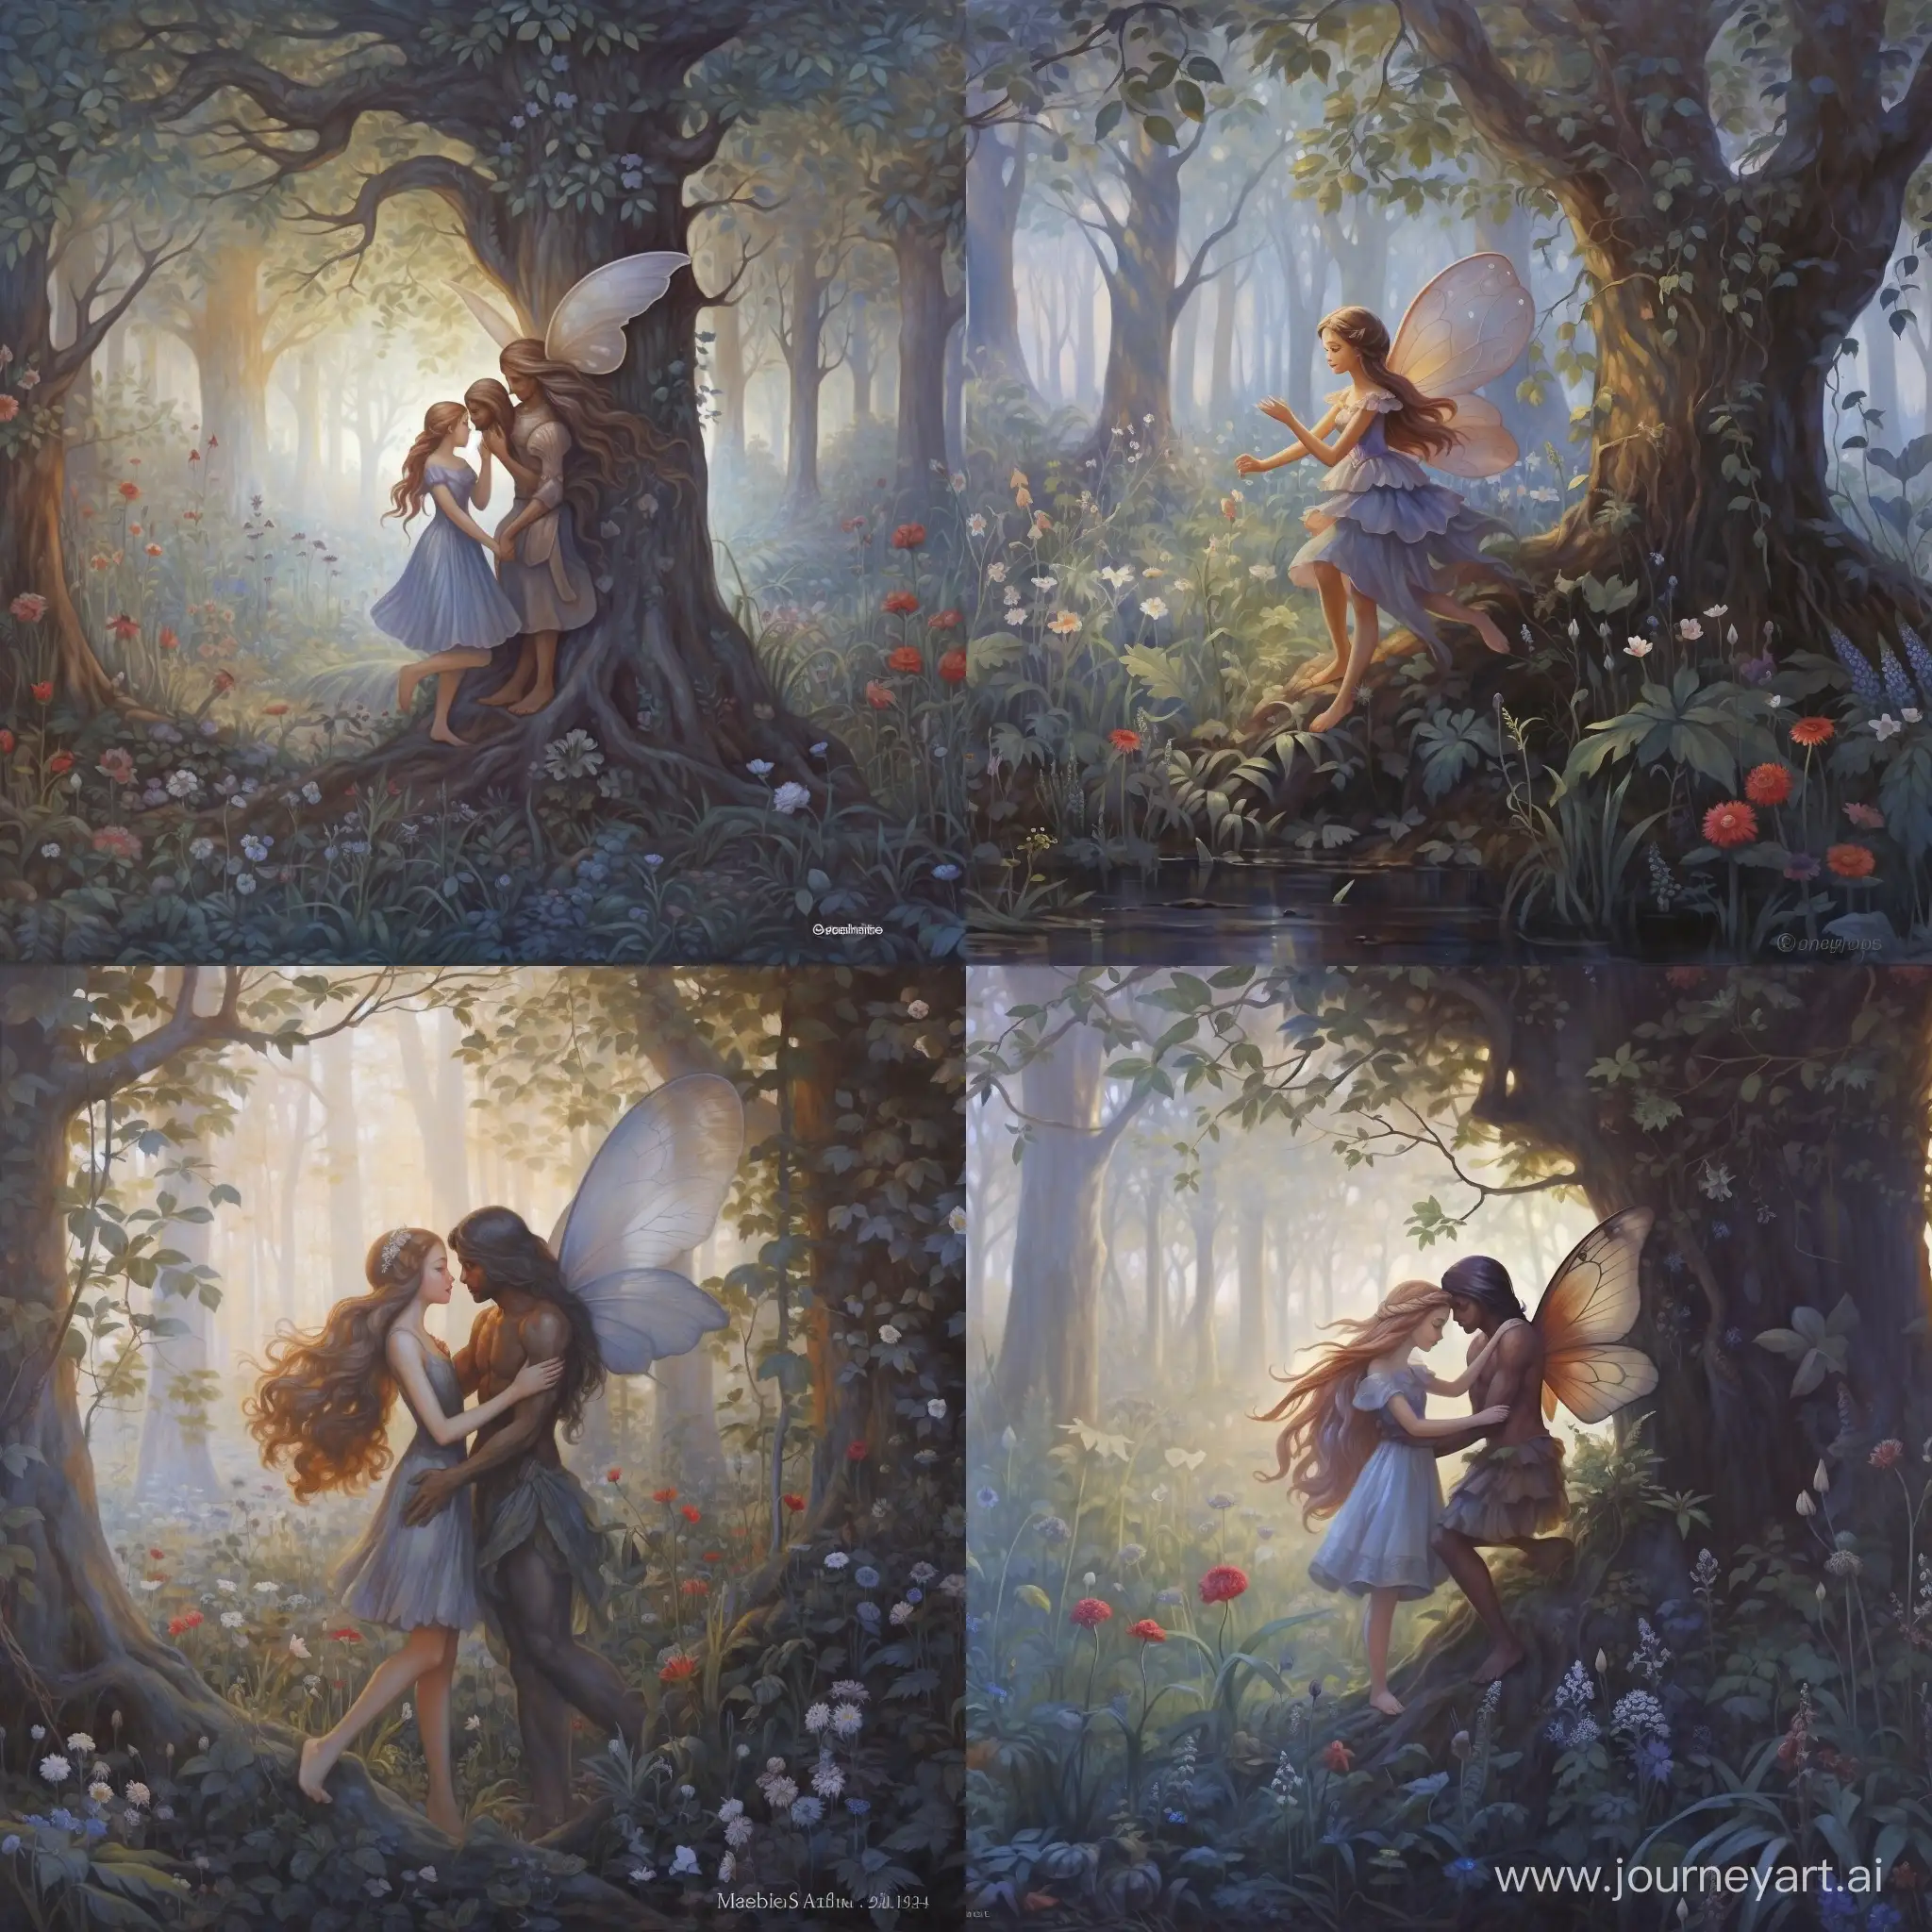 Enchanting-CloseUp-Satyr-and-Nymph-Embraced-in-a-Magical-Forest